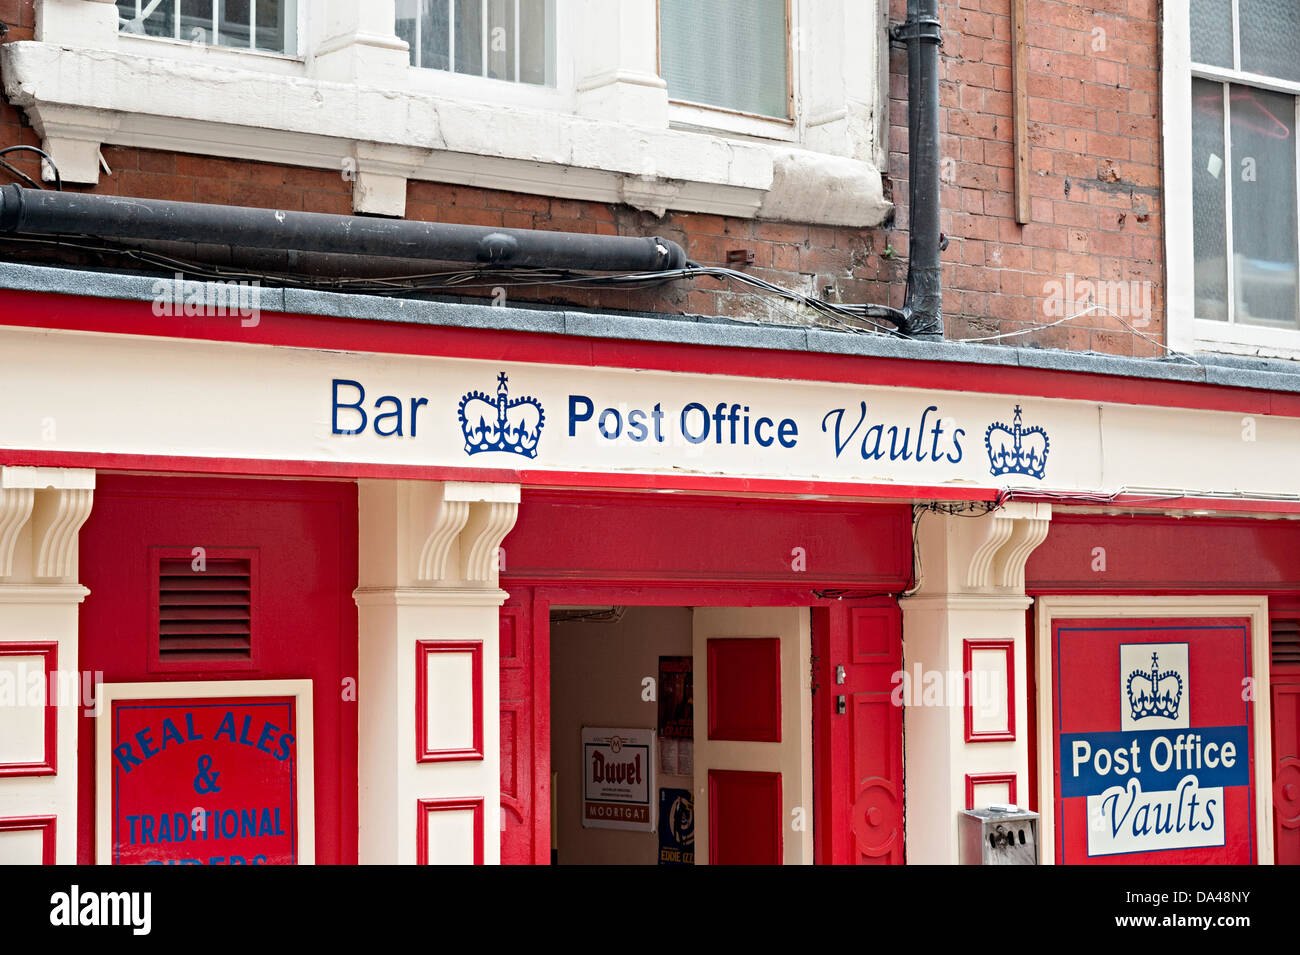 The post office vaults bar birmingham real ale and foreign beer pub new street Stock Photo